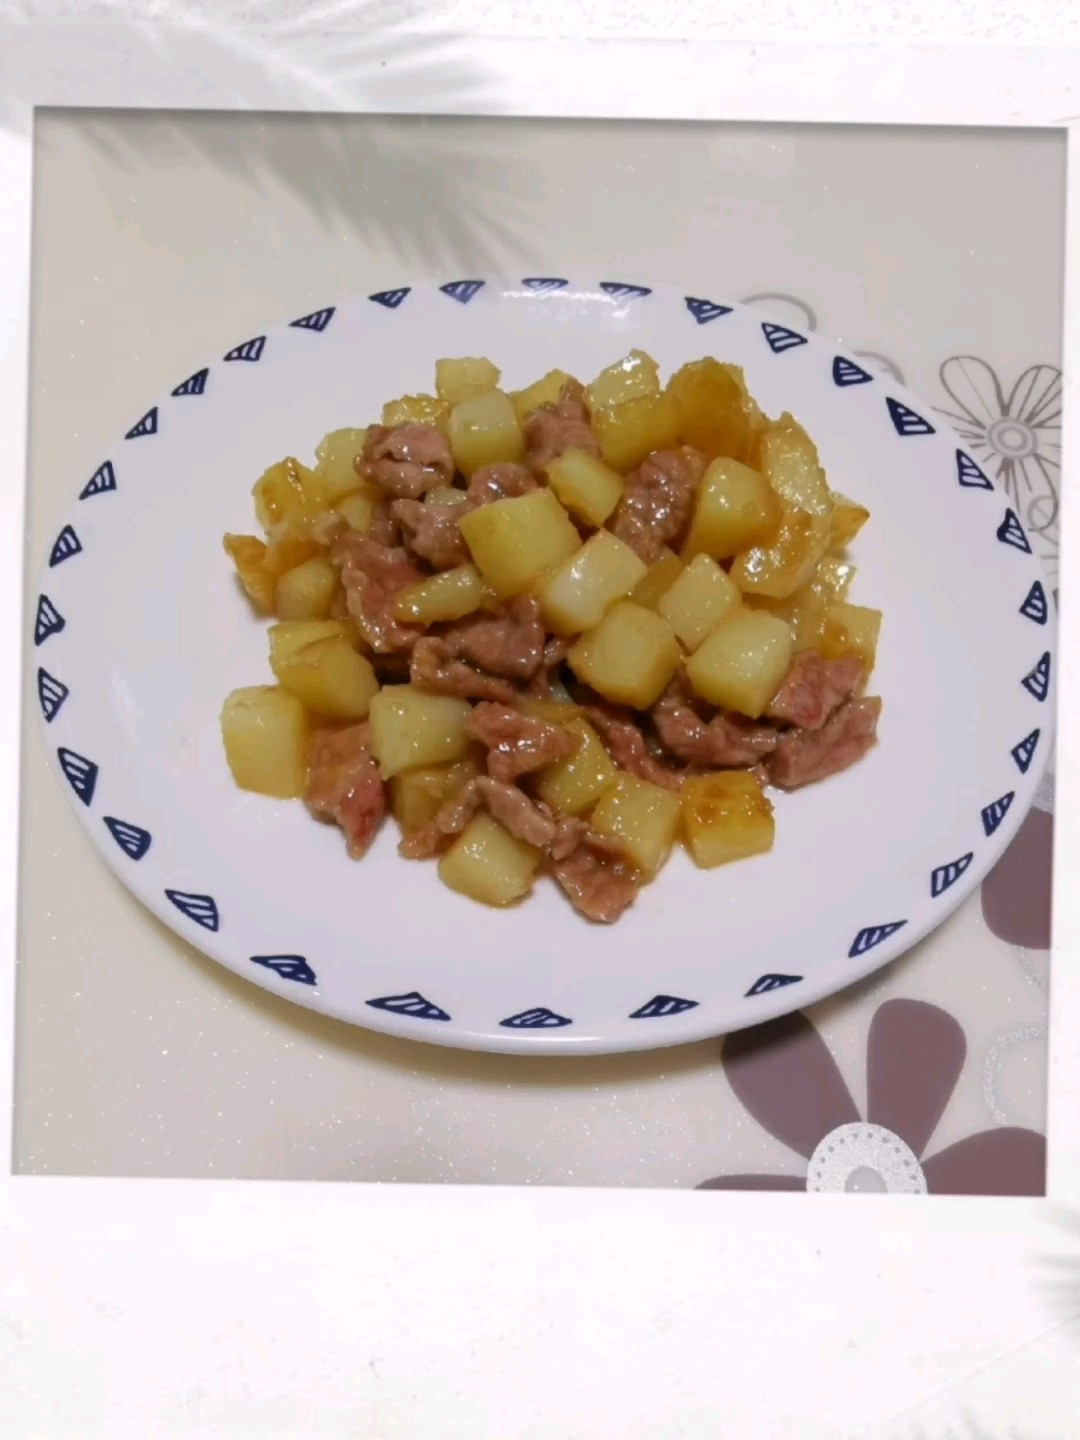 Stir-fried Beef with Potatoes recipe